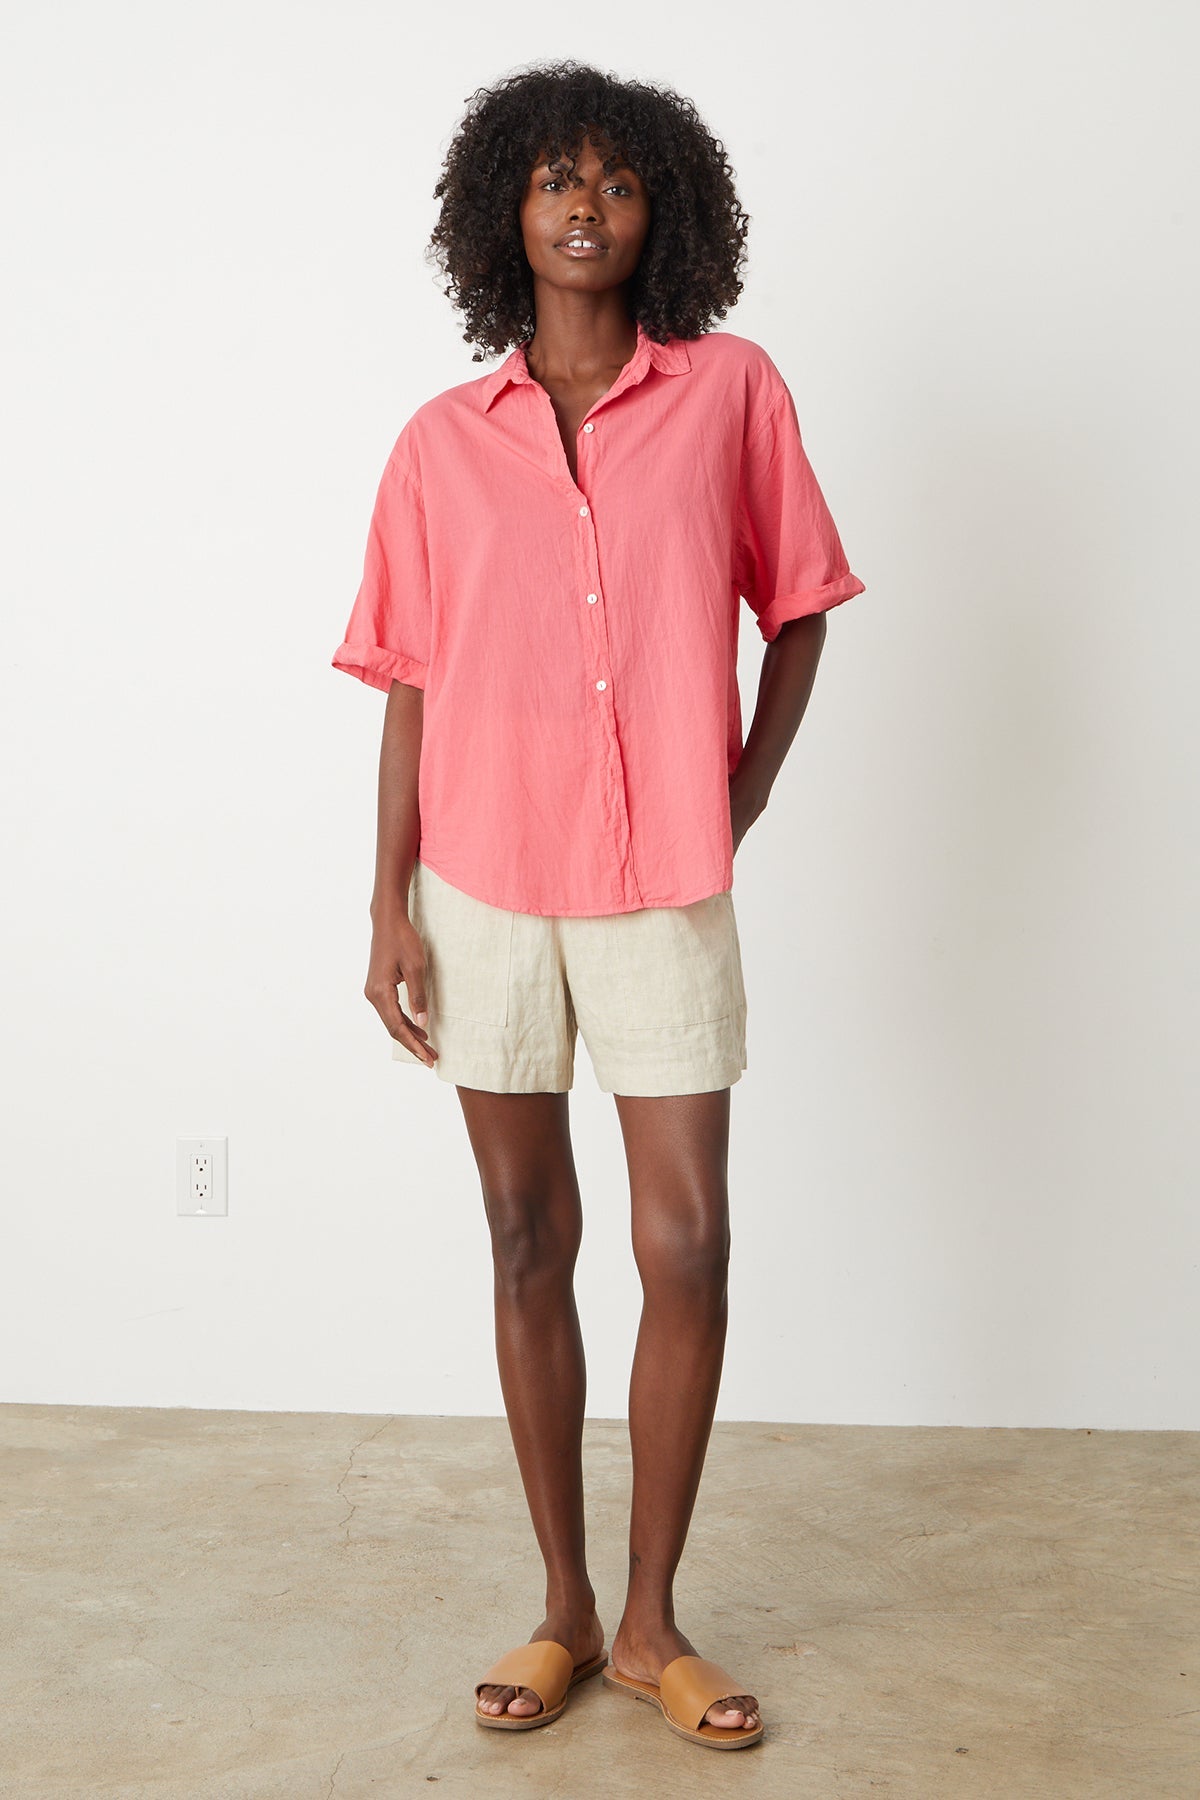 The model is wearing a Velvet by Graham & Spencer SHANNON BUTTON-UP SHIRT in pink and tan shorts.-26801046782145